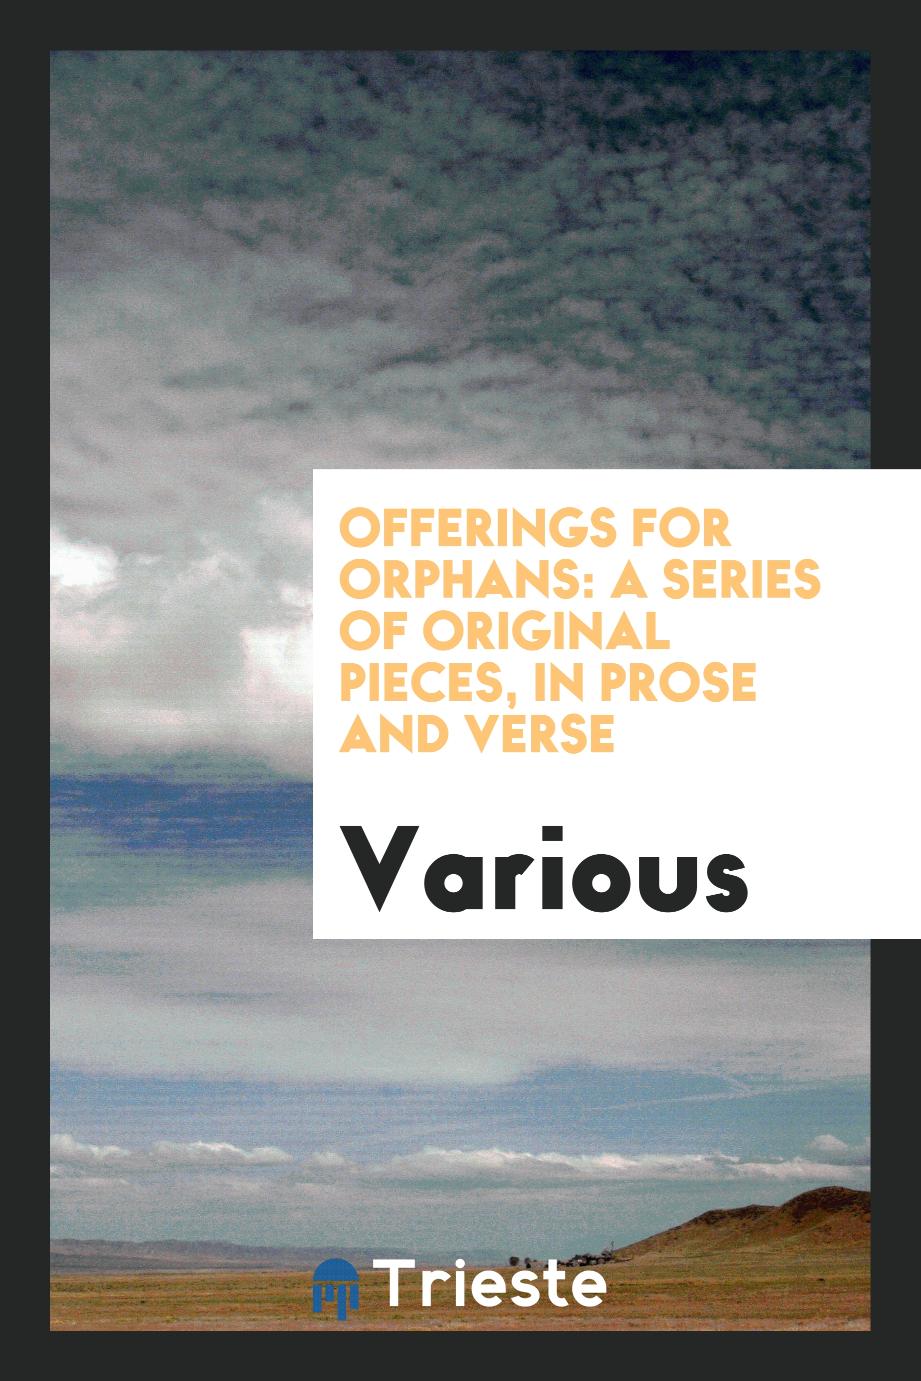 Offerings for Orphans: A Series of Original Pieces, in Prose and Verse